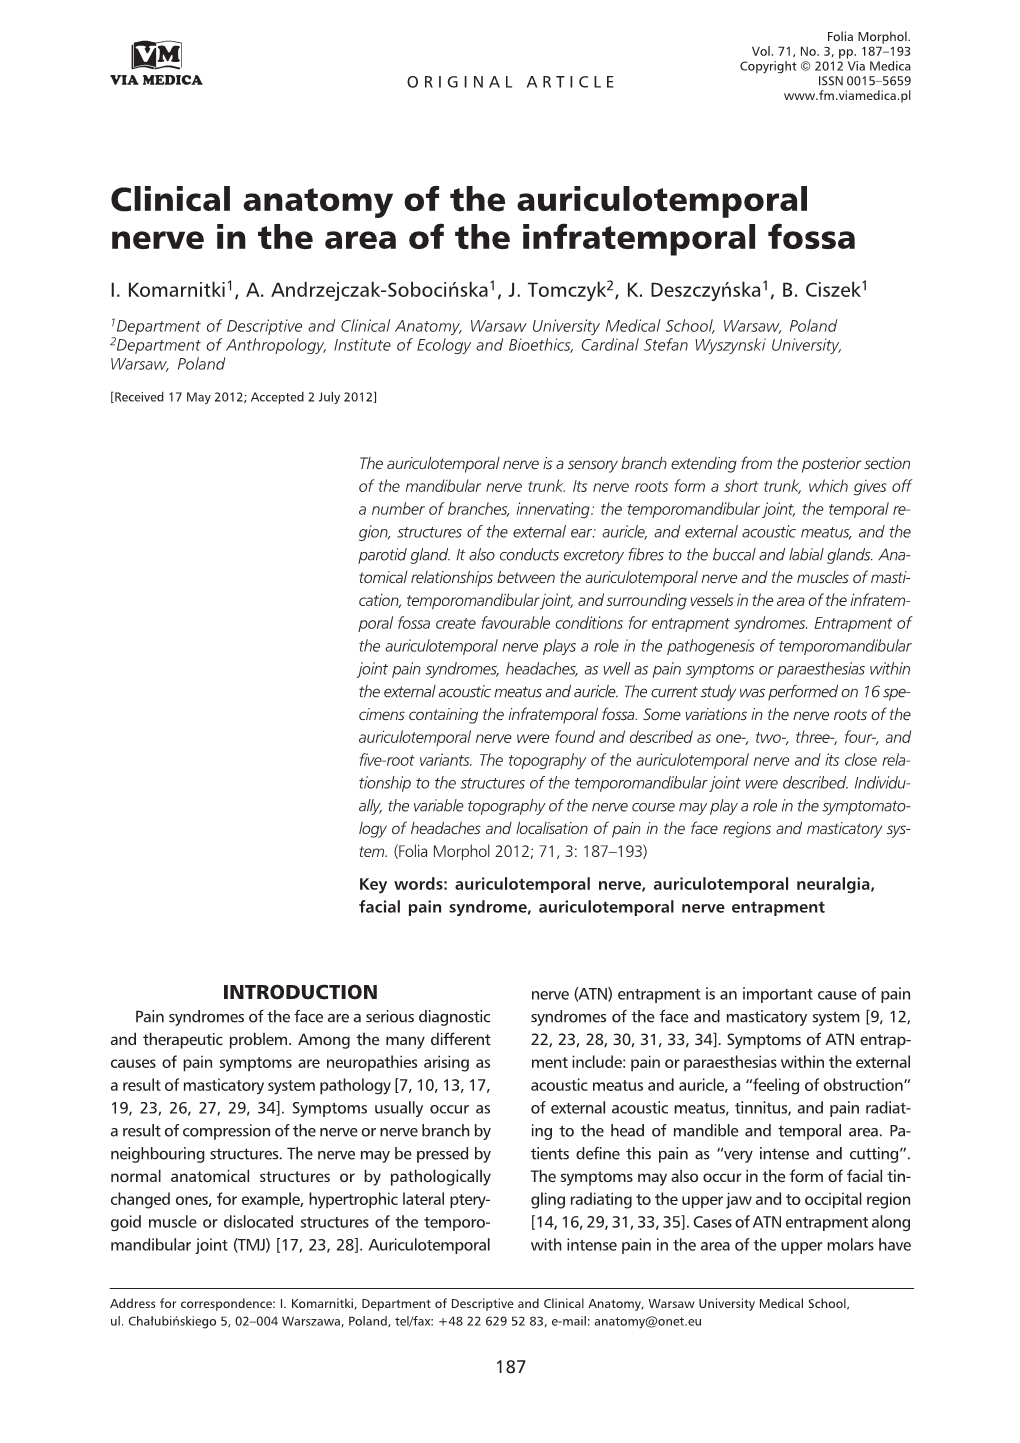 Clinical Anatomy of the Auriculotemporal Nerve in the Area of the Infratemporal Fossa